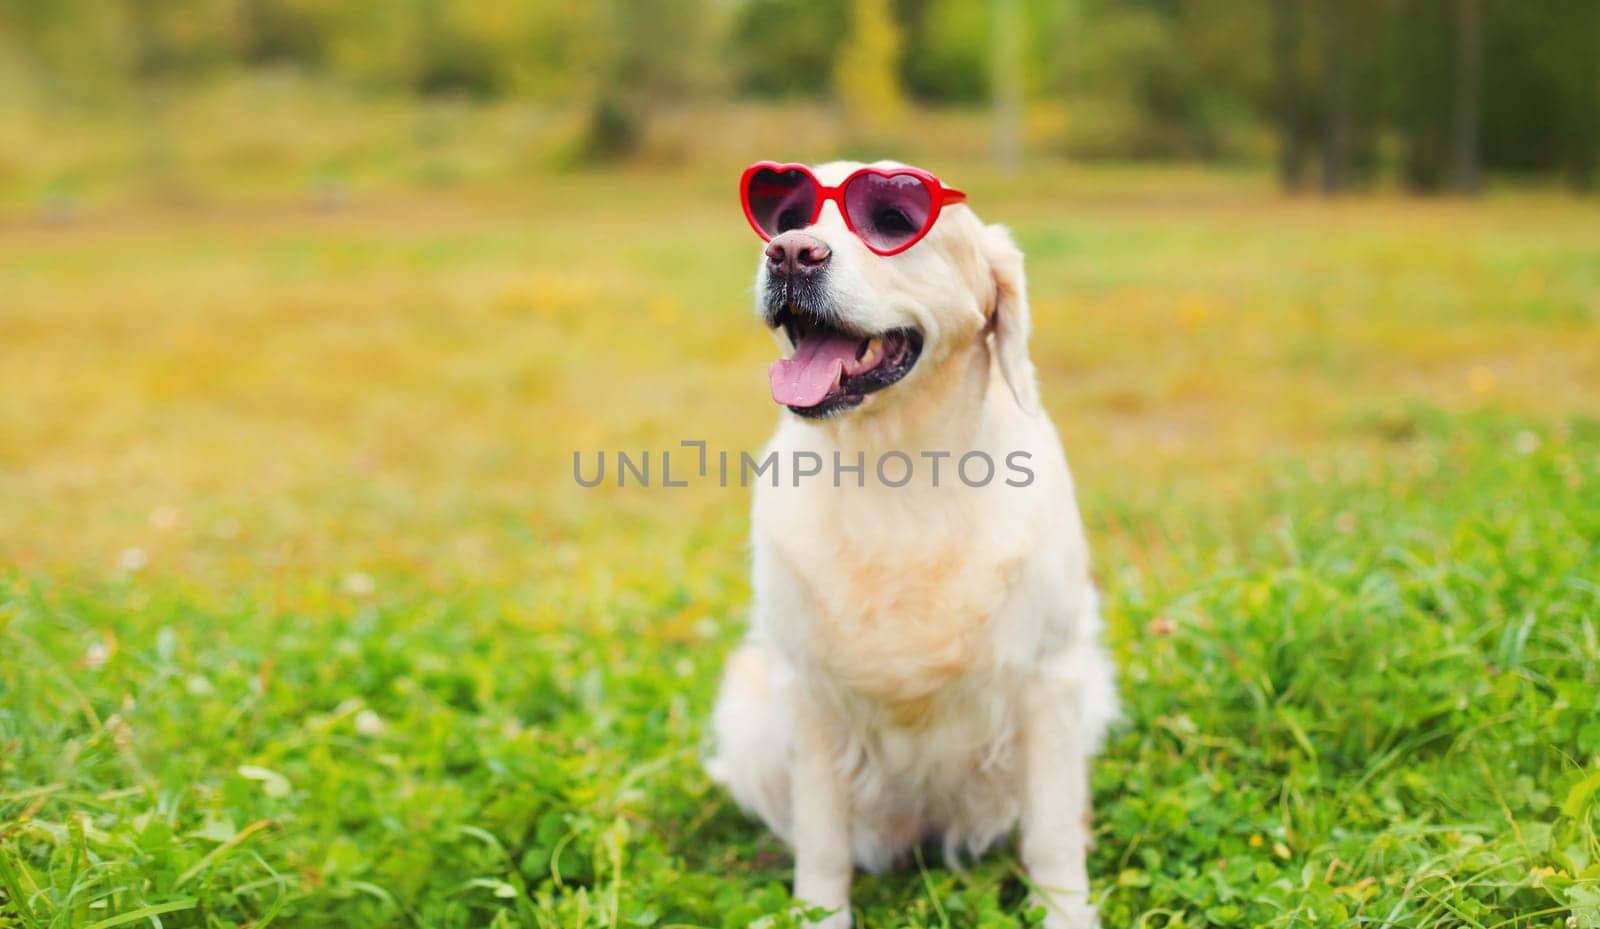 Portrait of happy Golden Retriever dog in red heart shaped sunglasses sitting on green grass in summer park